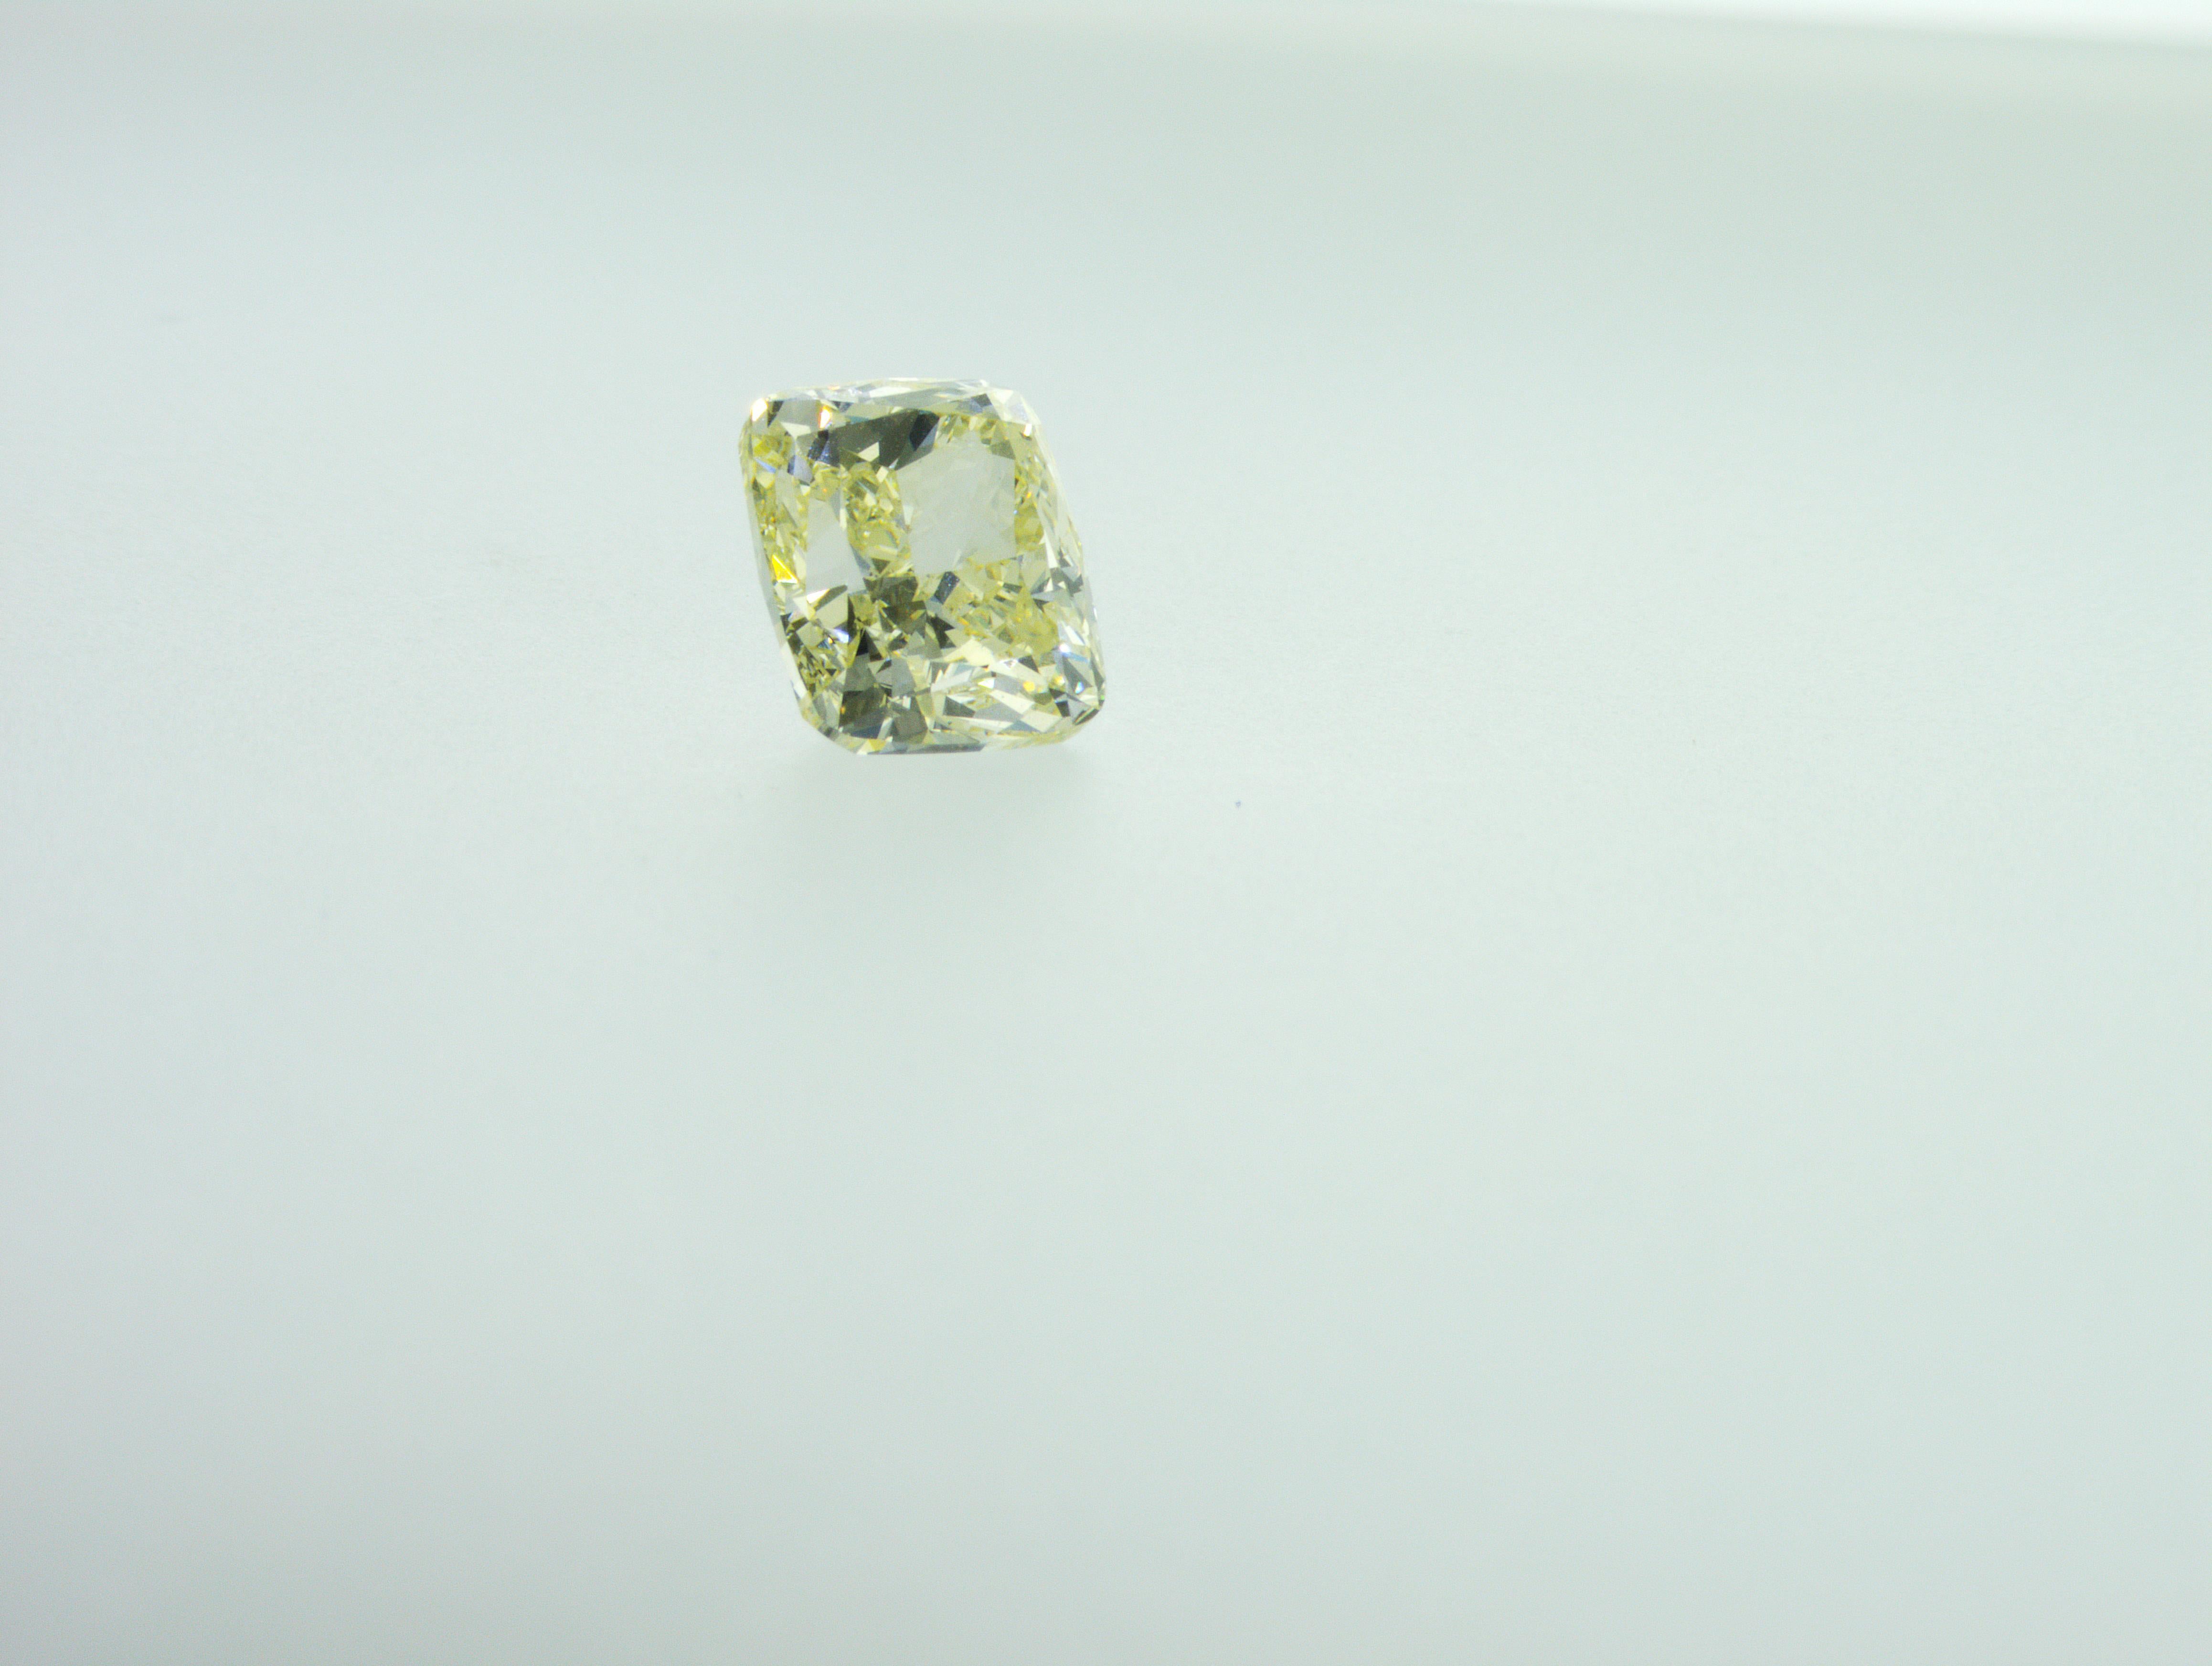 We are natural diamond production company located in Dubai.
Weight: 3.01ct
Shape: Cushion
Color: rare Y-Z (Yellow)
Clarity: VVS2
Polish: Excellent
Symm: Very Good
Dimensions (mm): 8.47 x 7.31 x 5.73
All our diamonds with the inscription from the